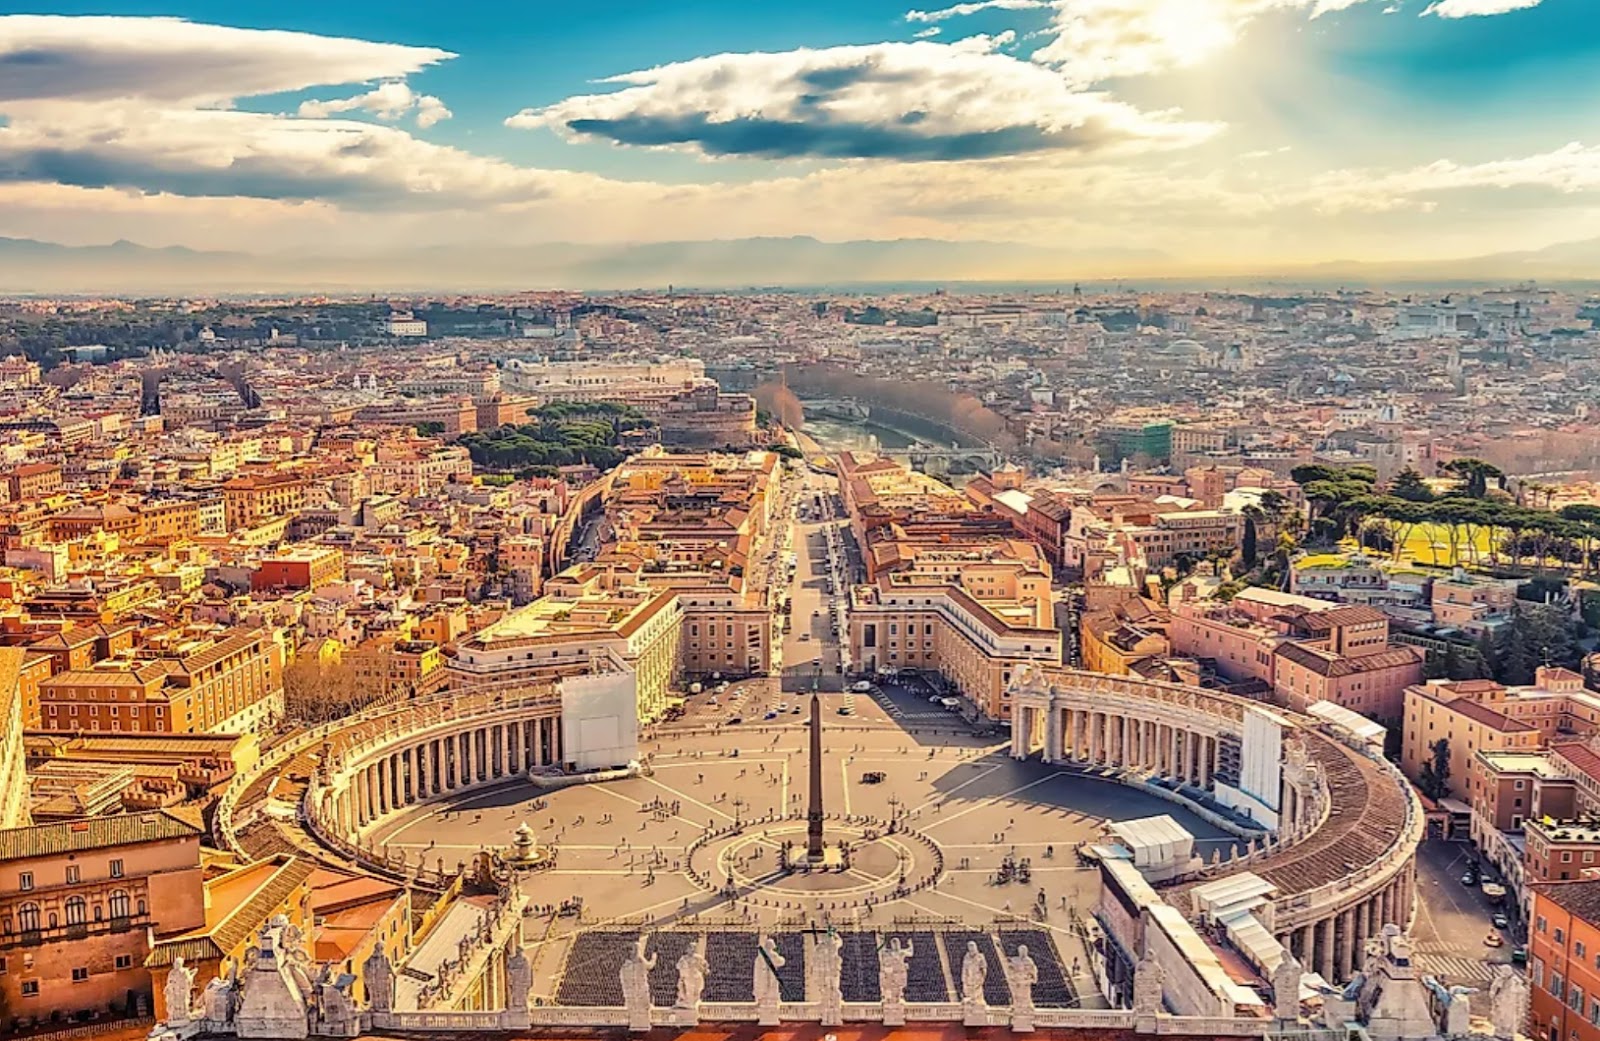 Vatican City has a population of less than 1,000